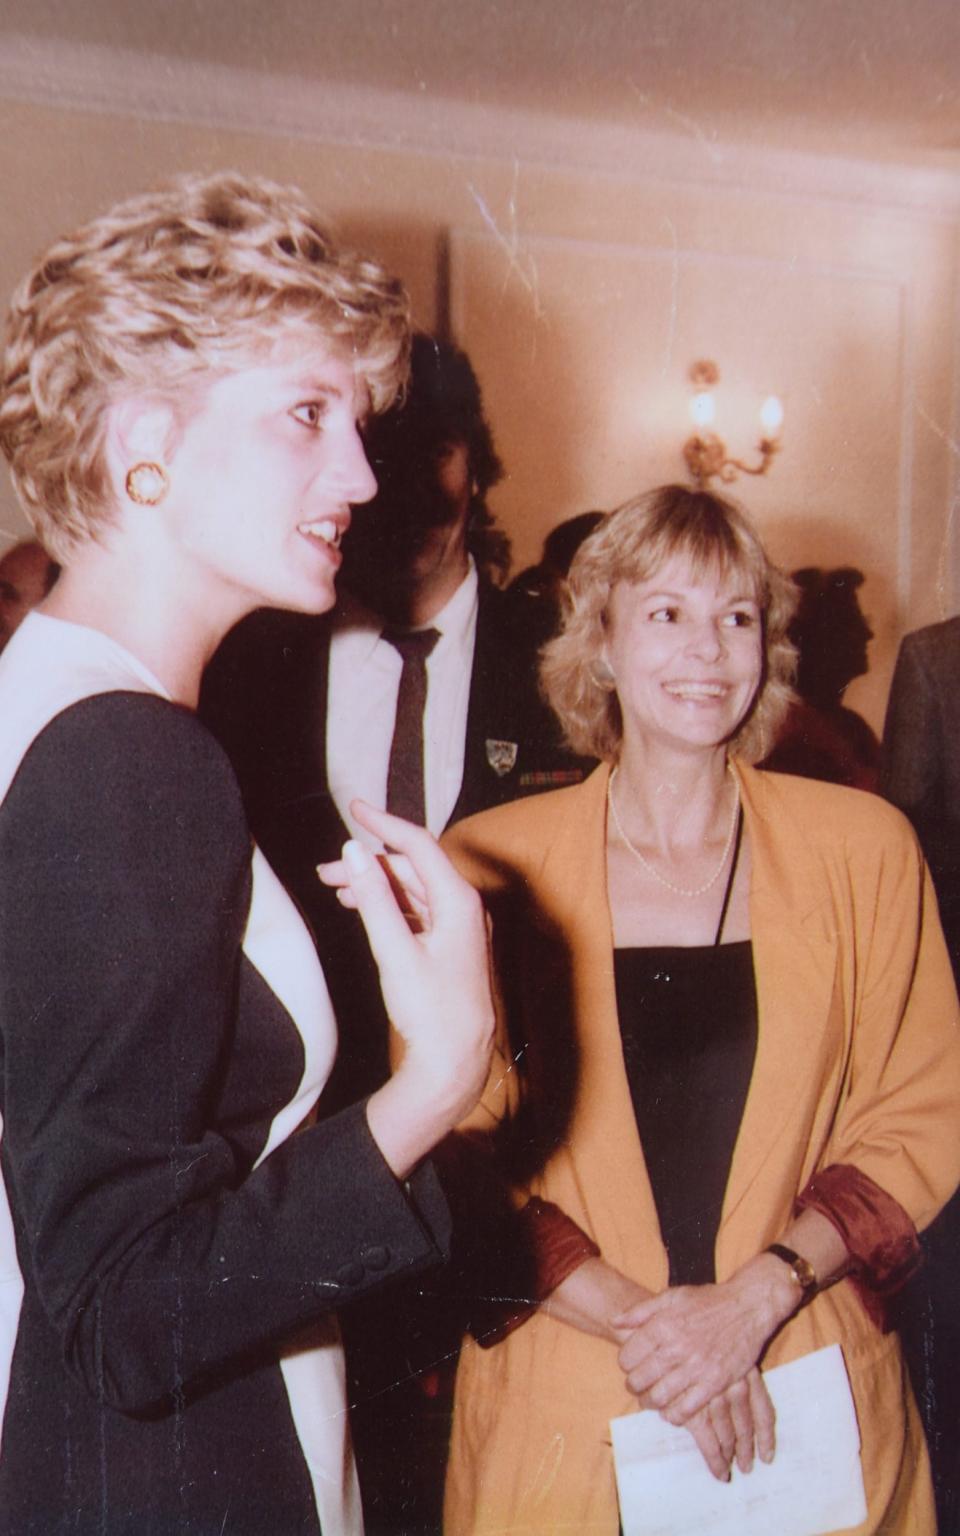 Sally with Diana Princess of Wales at a charity event in 1992 - JAY WILLIAMS